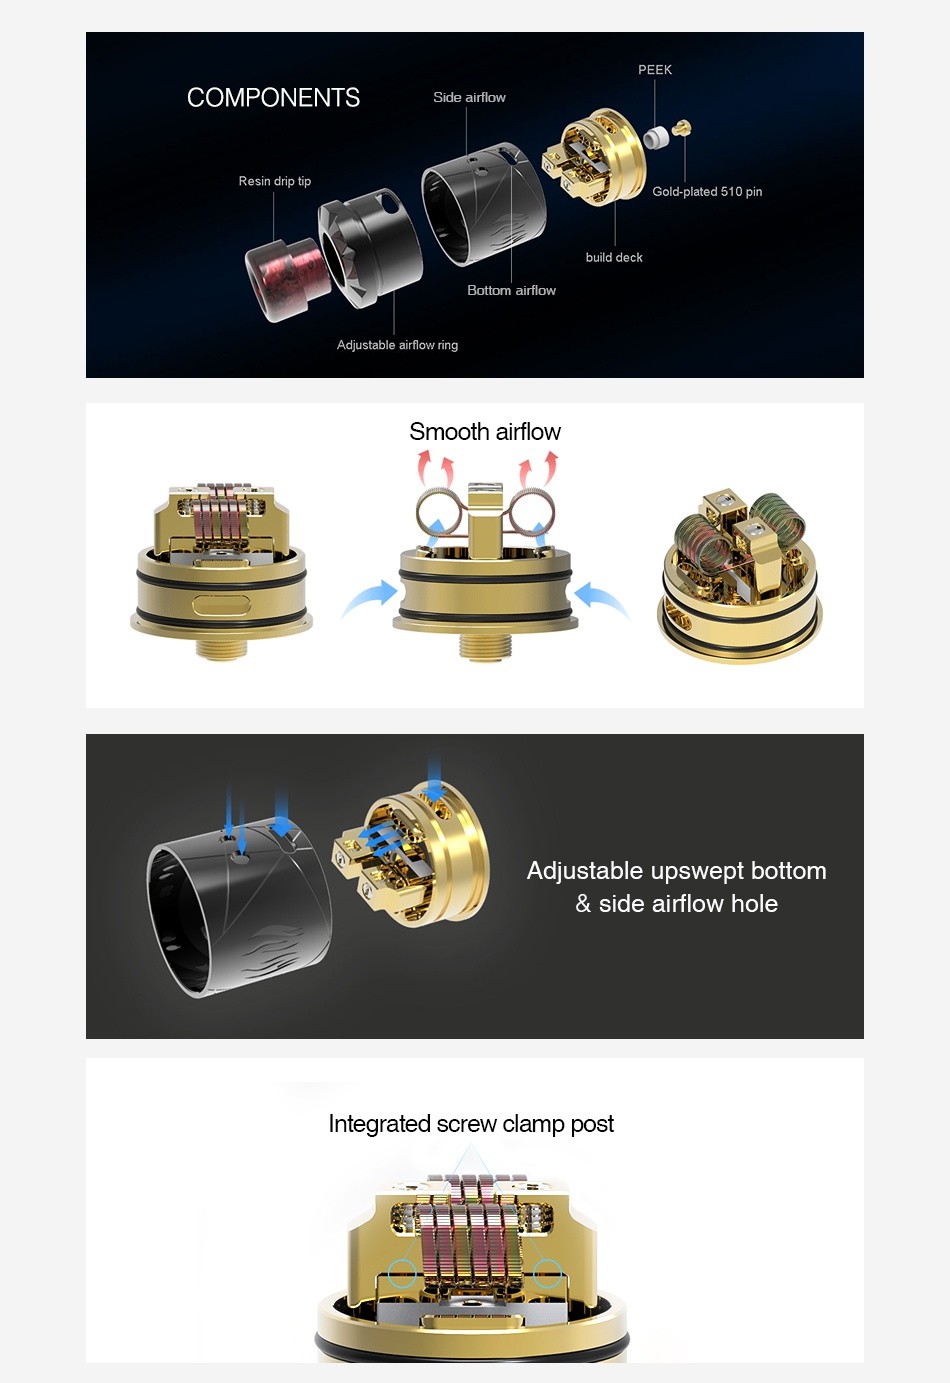 Avidvape Ghost Inhale RDA COMPONENTS de airflow Resin drip tip Gold plated 510 build deck Adjustable airflow ring Smooth airflow Adjustable upswept bottom side airflow hole Integrated screw clamp post